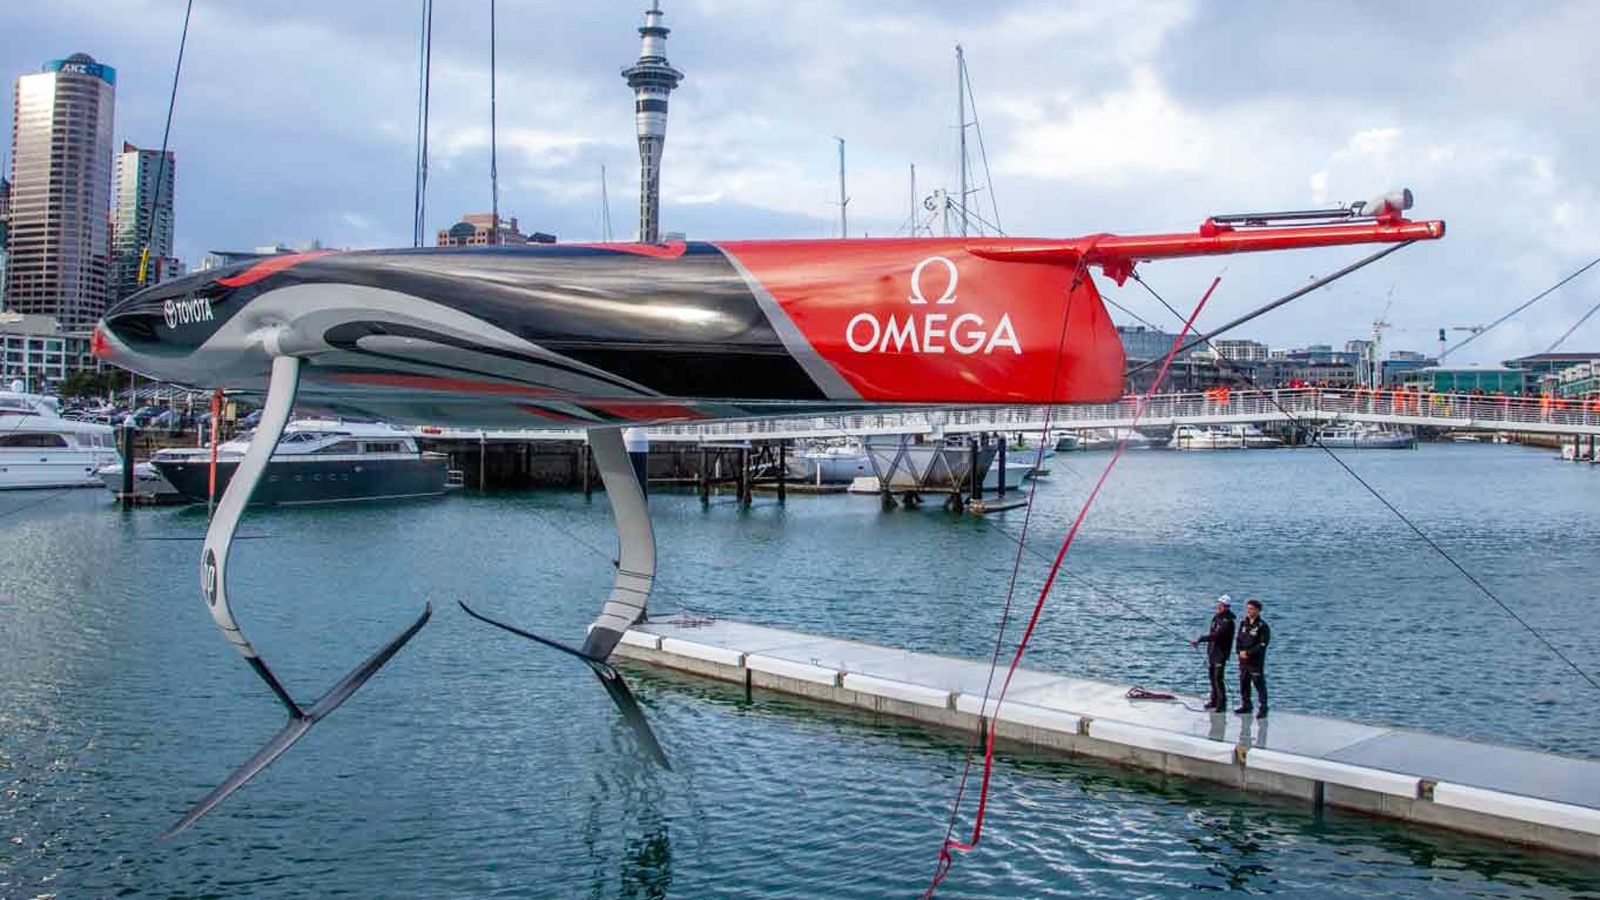 AC75 Monohull Launched By Team New Zealand [First America’s Cup]